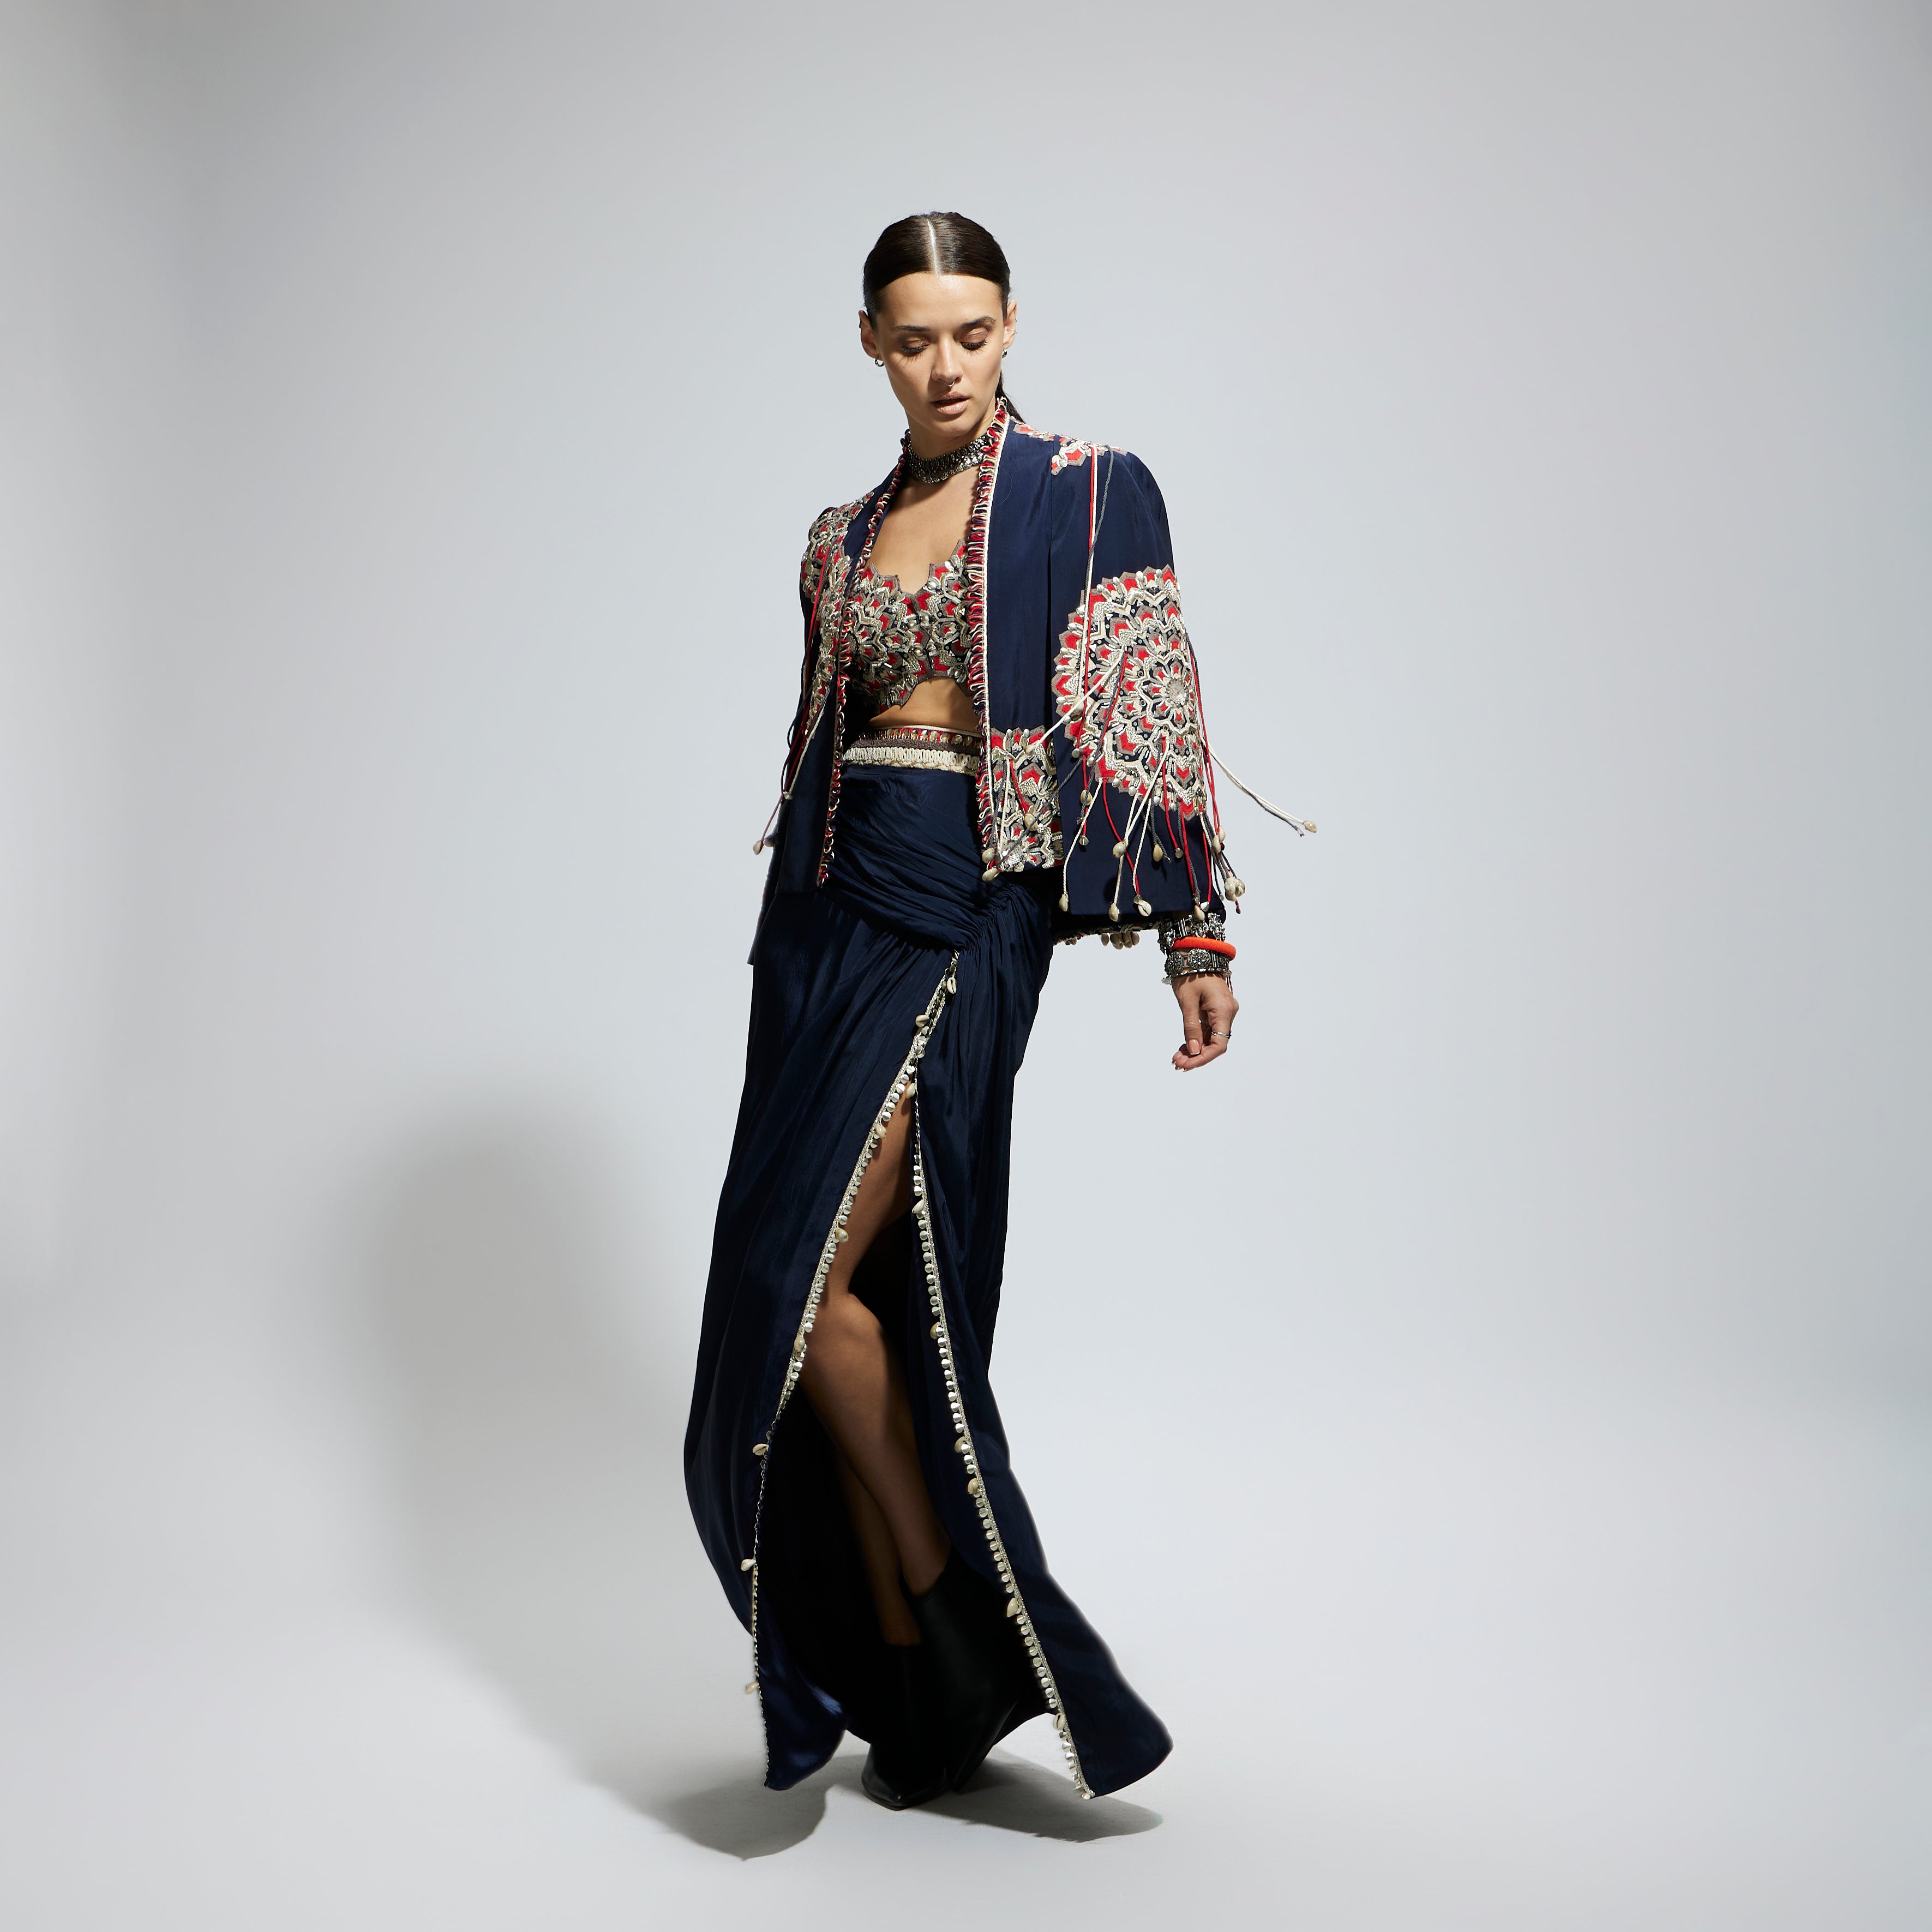 BLUE ASYMETRIC THREADWORK CAPE JACKET PAIRED WITH AN EMBELLISHED BUSTIER AND HIGH SLIT SKIRT